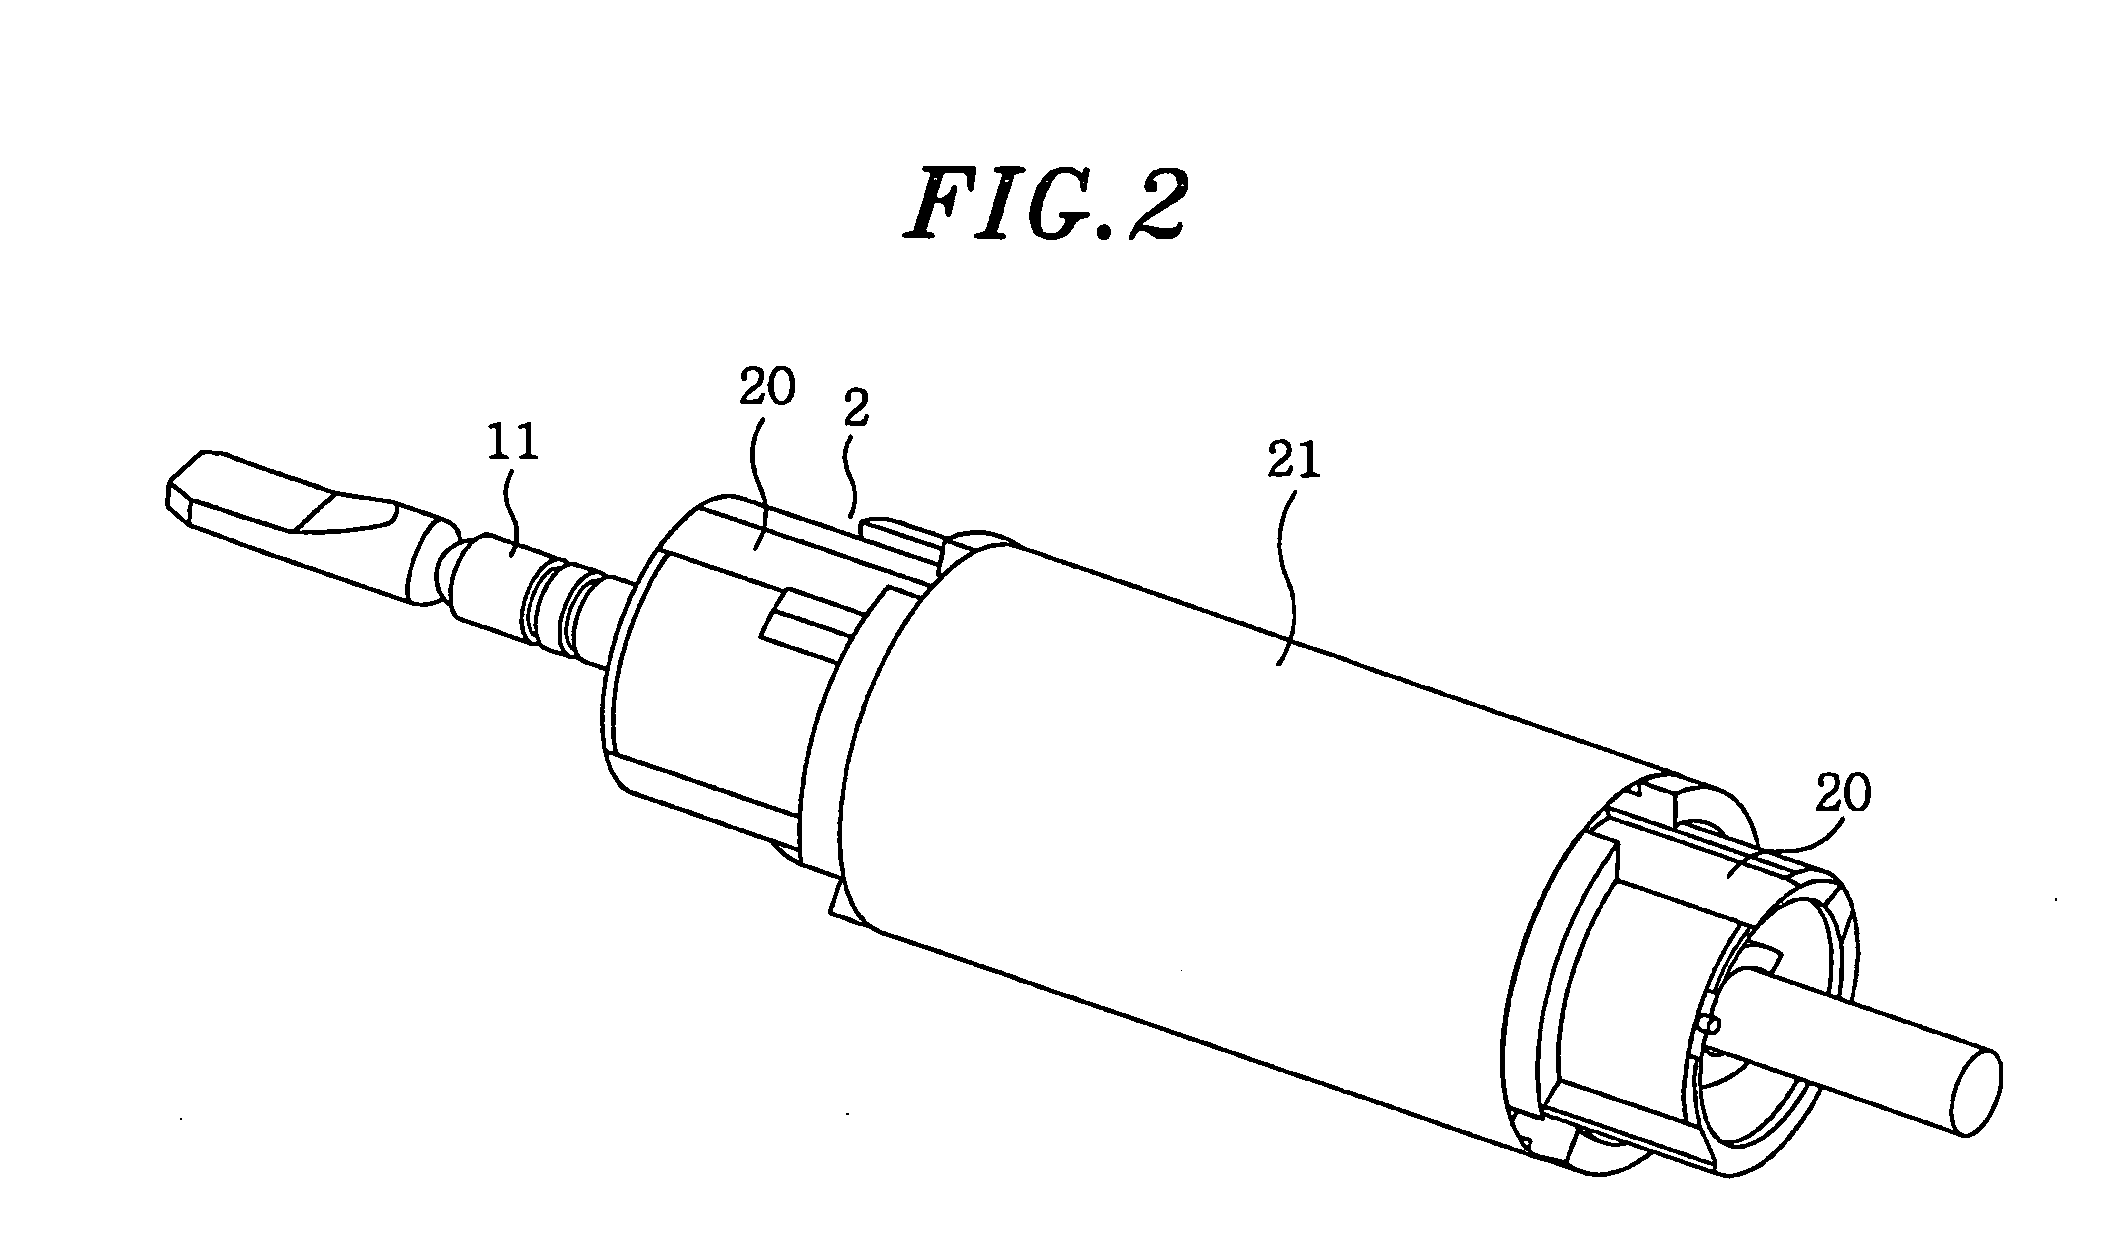 Actuator and electric toothbrush using the same